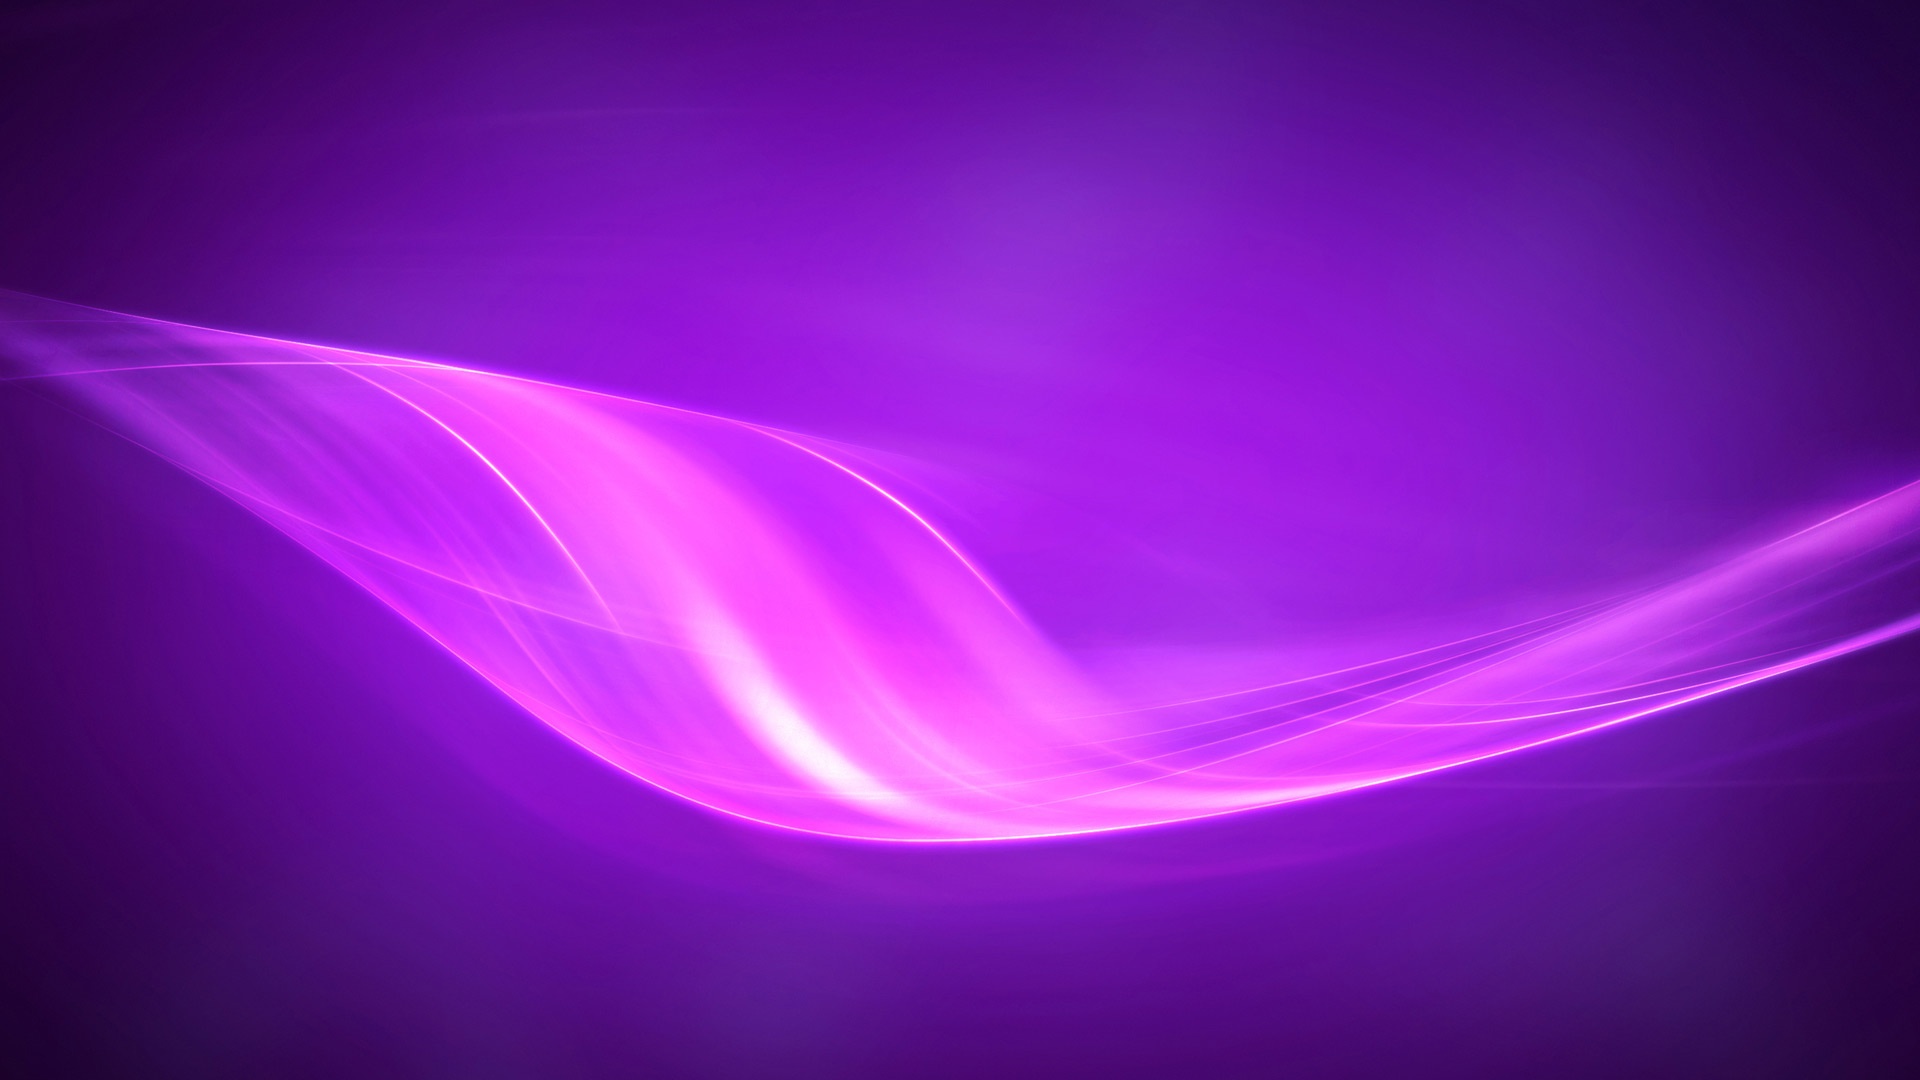 abstract wallpapers hd purple design